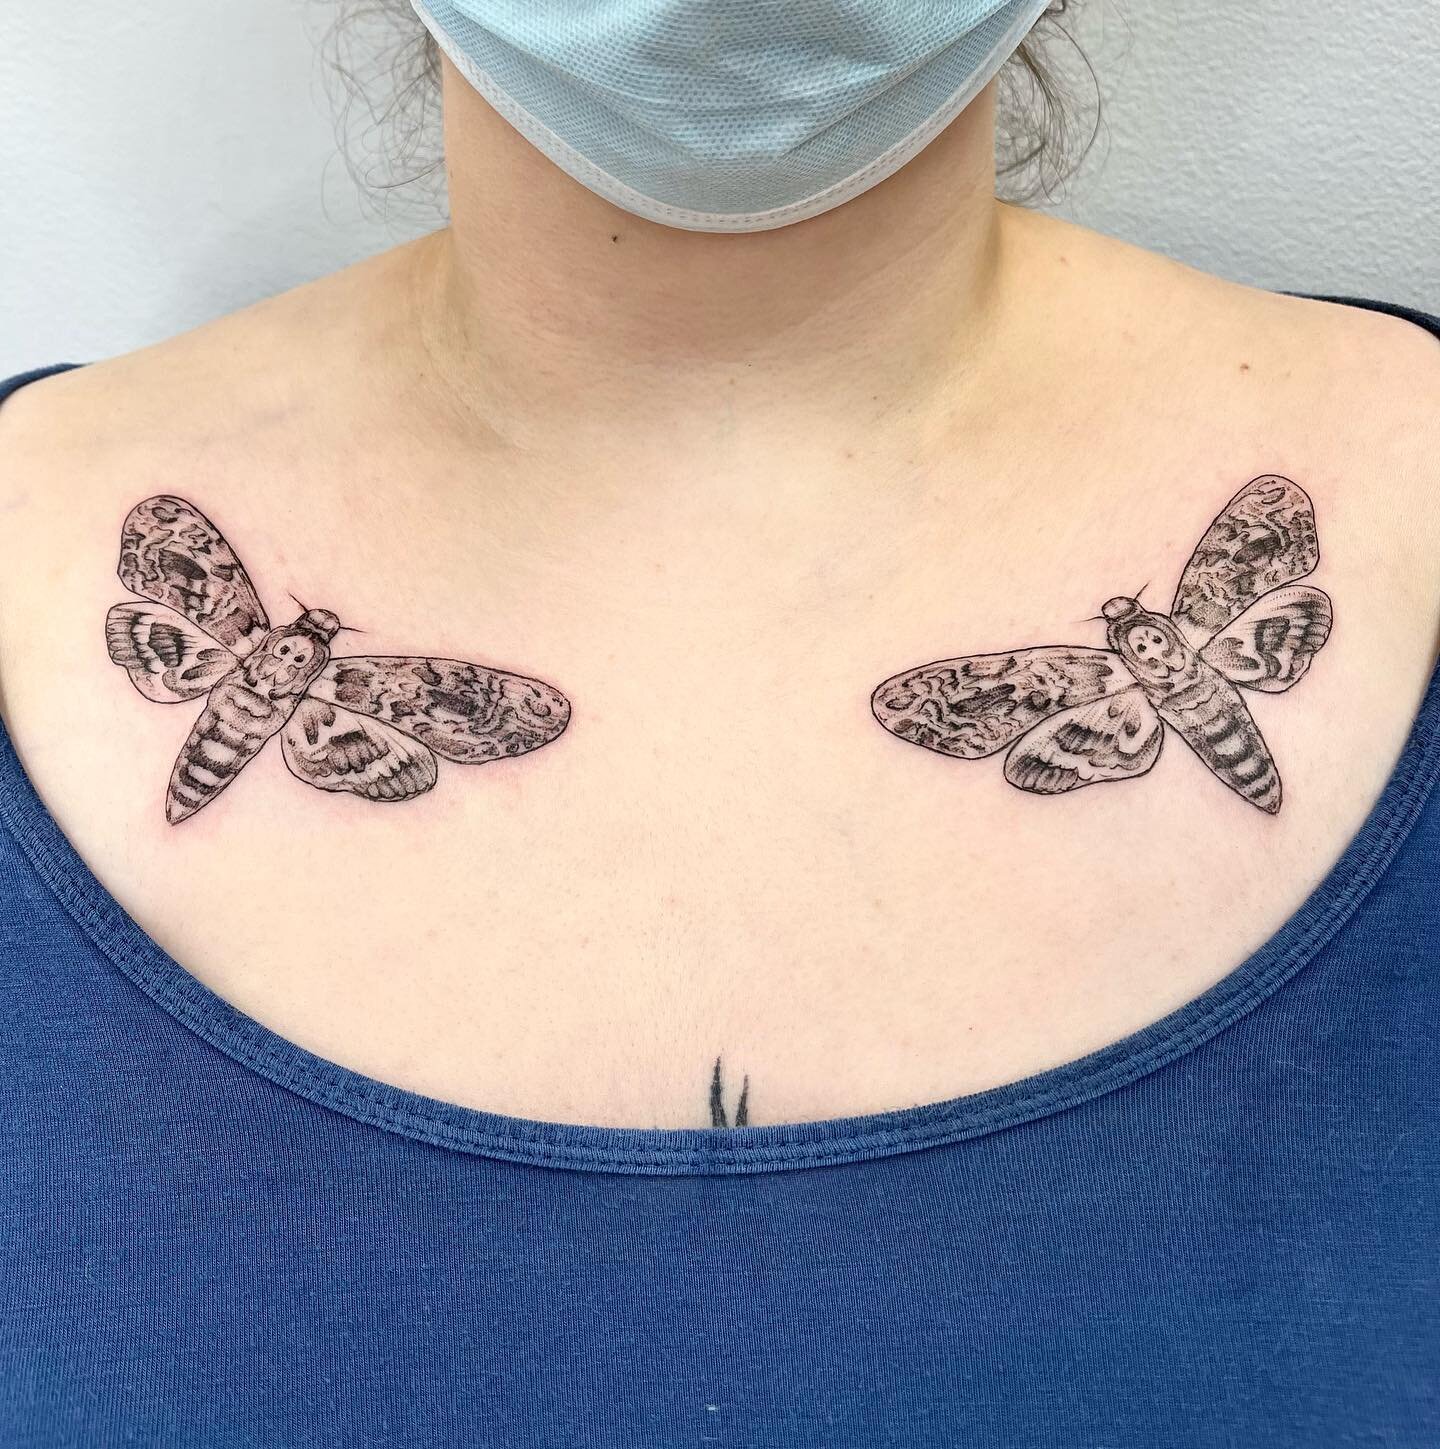 Pair of death&rsquo;s-head moths for Hannah. 

.
..
&hellip;
..
.

#blacktattoo #tattooing #tattoodesign #art #blackworktattoo #tattoolife #fineline #blackwork #tattooed #dotwork #tattooart #tattooideas #tattoo #linework #finelinetattoo #inked #tatto